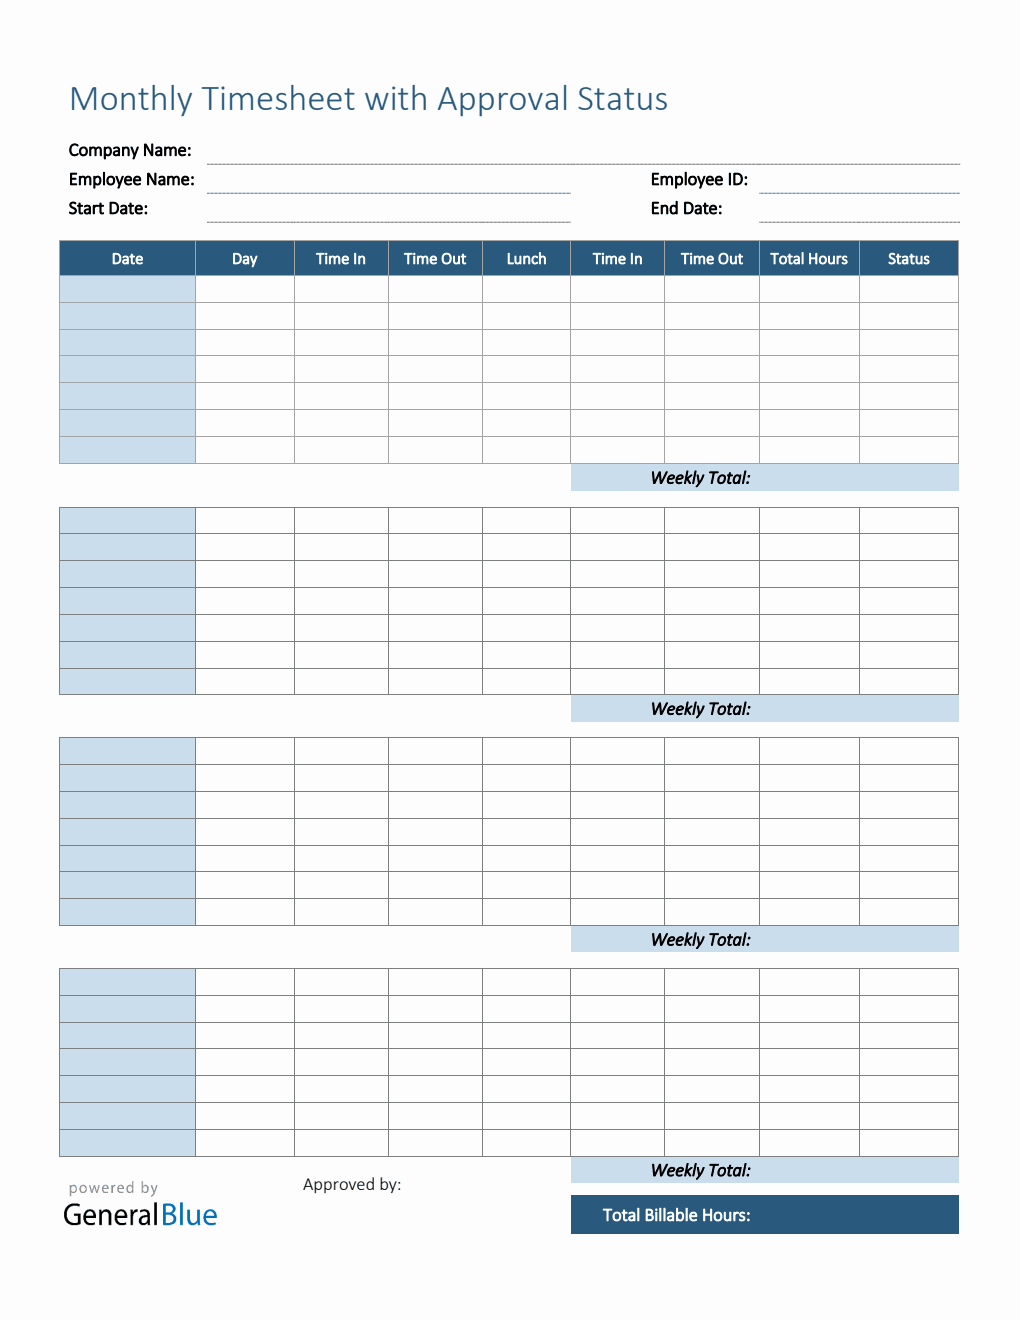 Monthly Timesheet With Approval Status in PDF